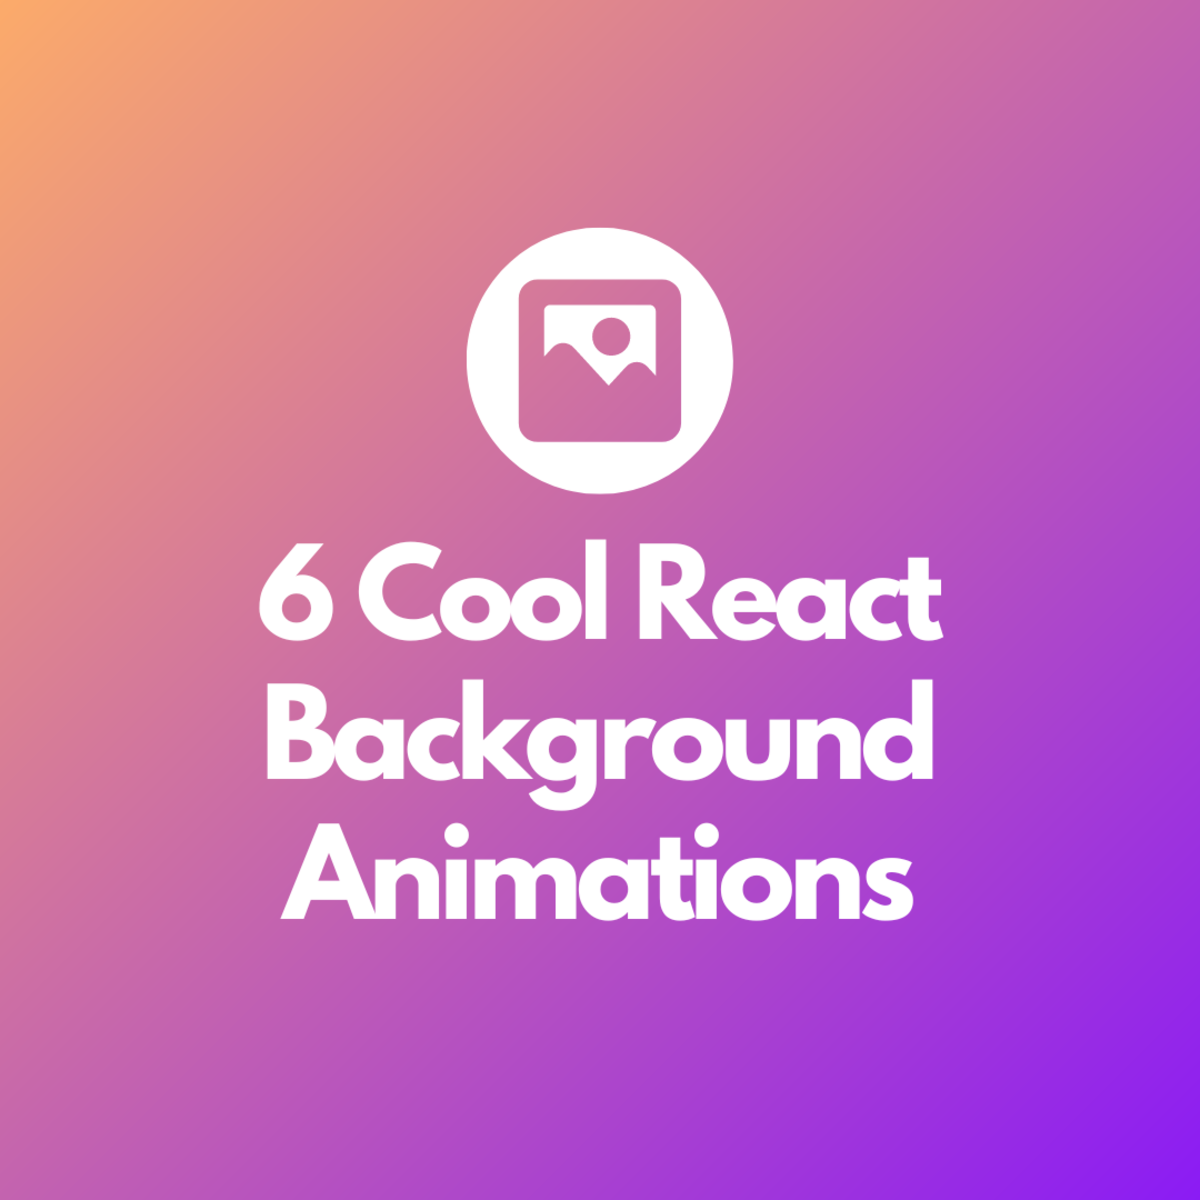 Discover a variety of amazing React background animation ideas in this ultimate list!